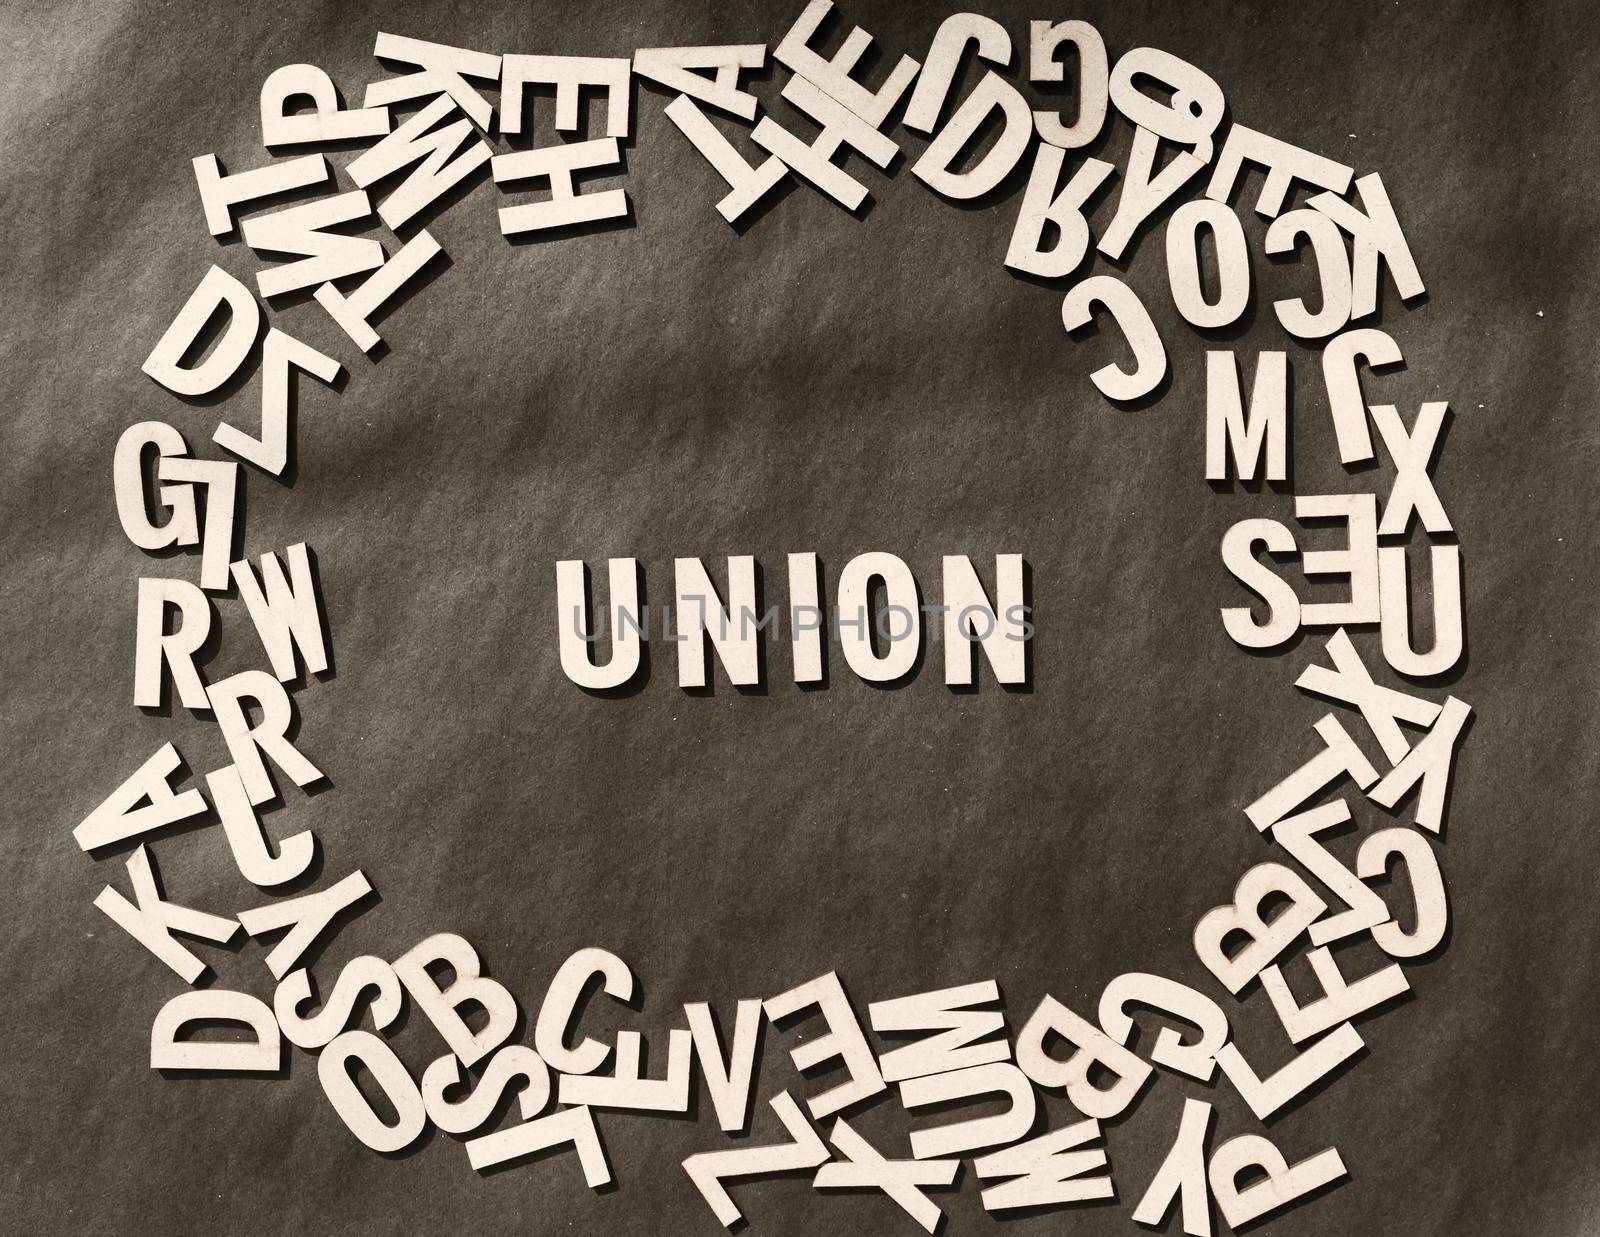 Union Word In Wooden Cube Alphabet Letters Top View On A rustic paper Background. by sudiptabhowmick